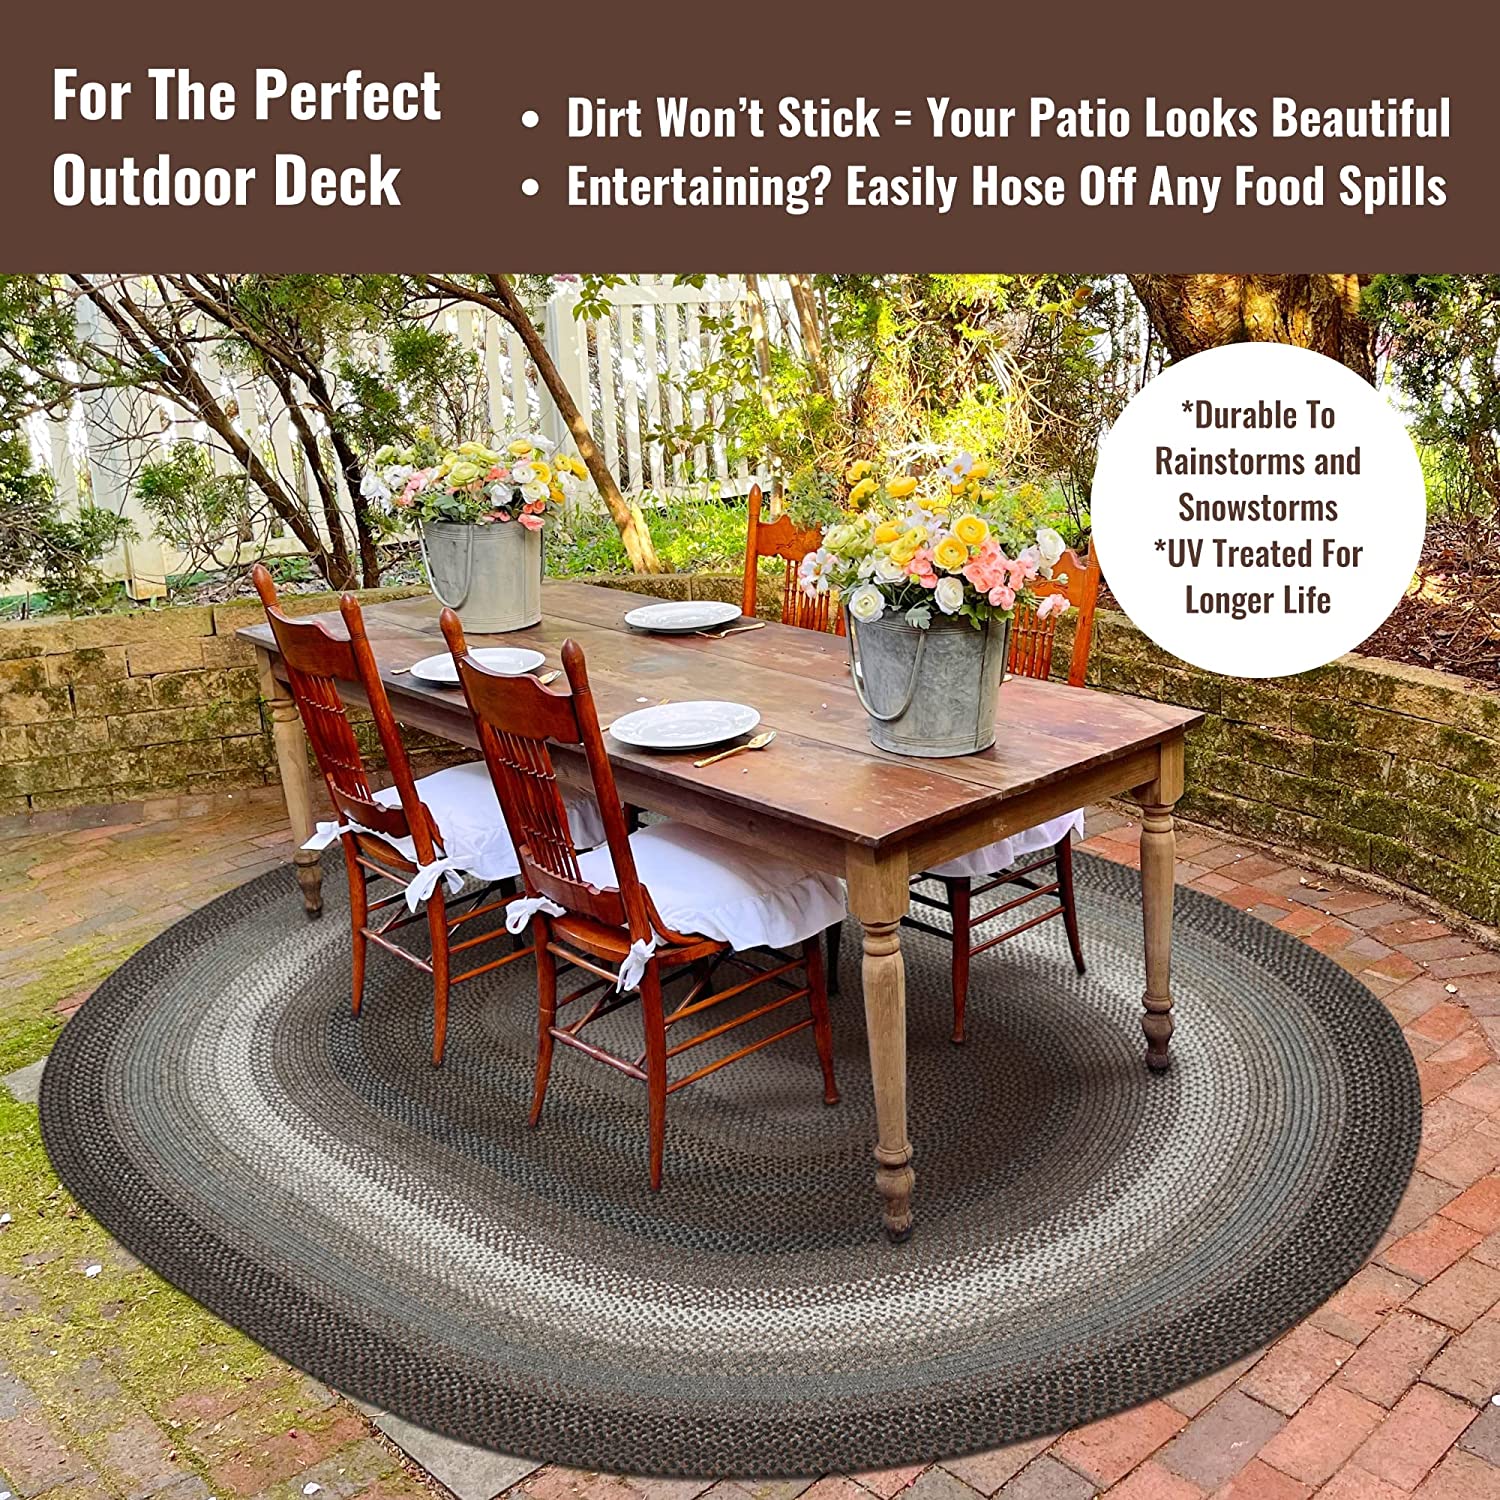 Midnight Moon Brown - Grey Ultra Durable Braided Oval Rugs - Braided-Rugs.com